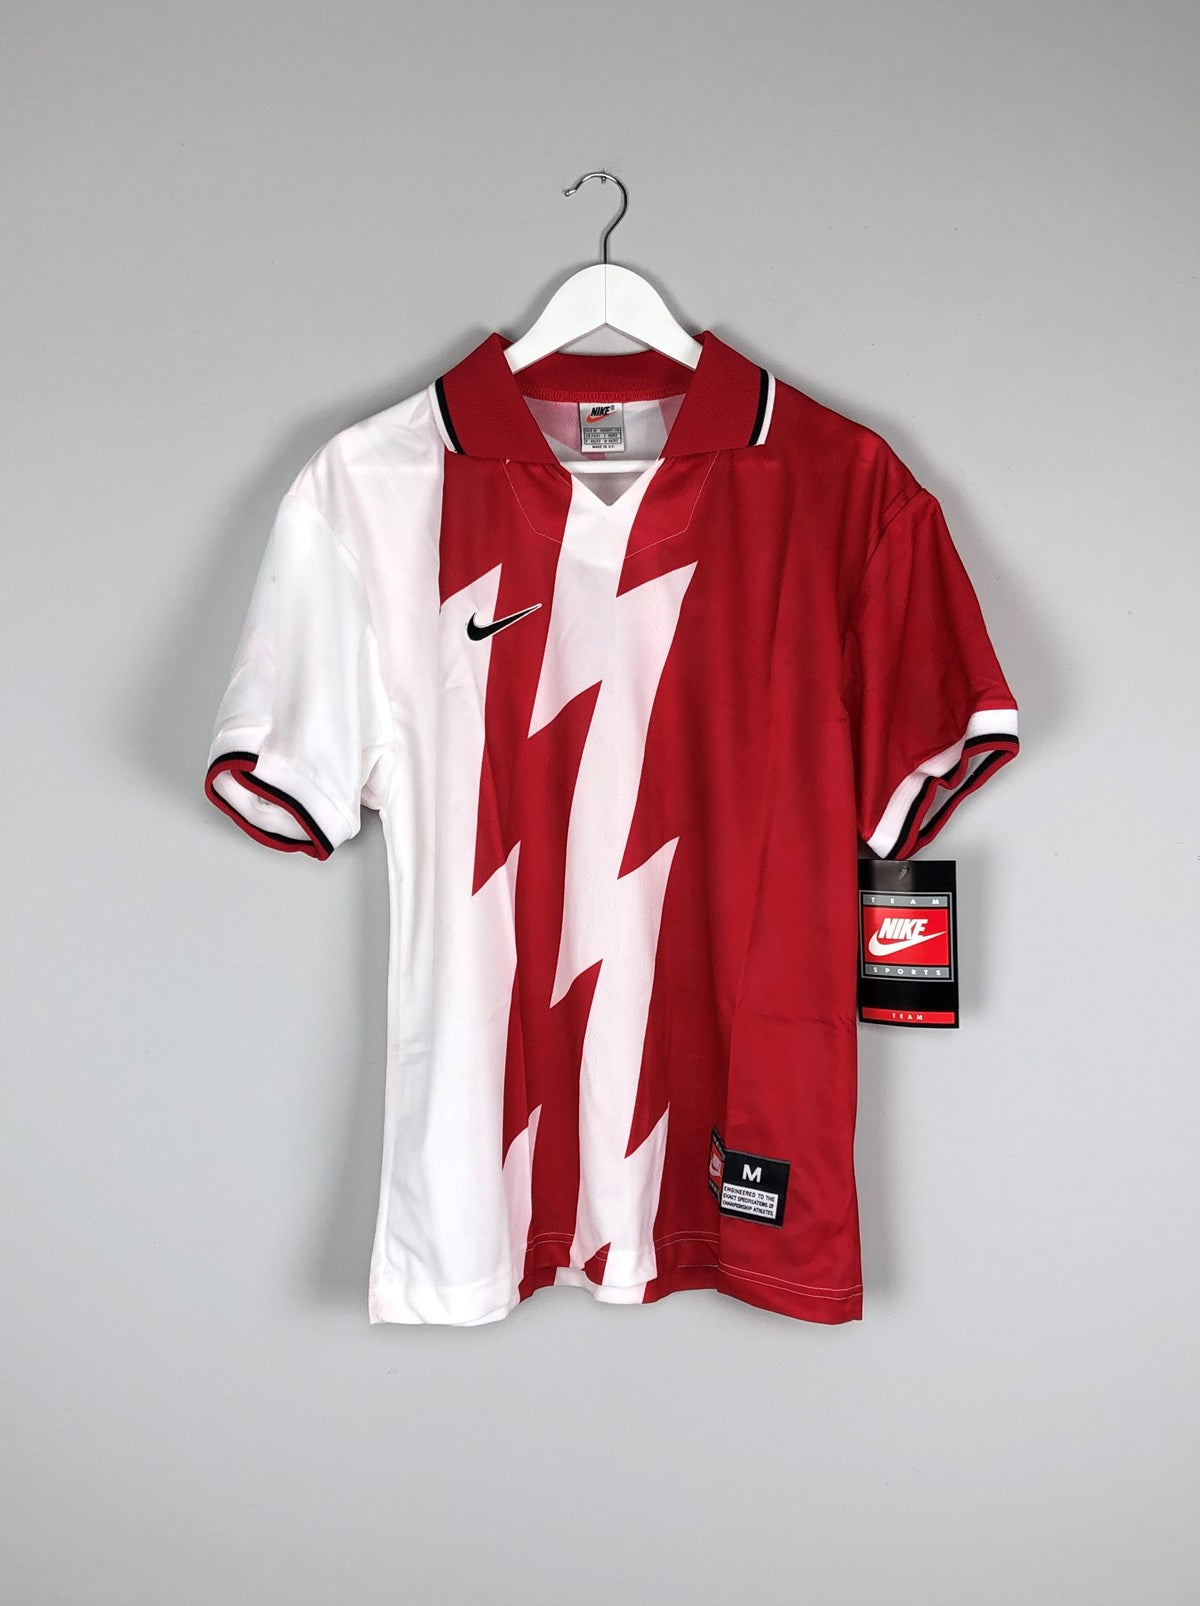 1995/97 NIKE *BNWT* TEMPLATE SHIRT (MULTIPLE SIZES), XS / 1995 / Template